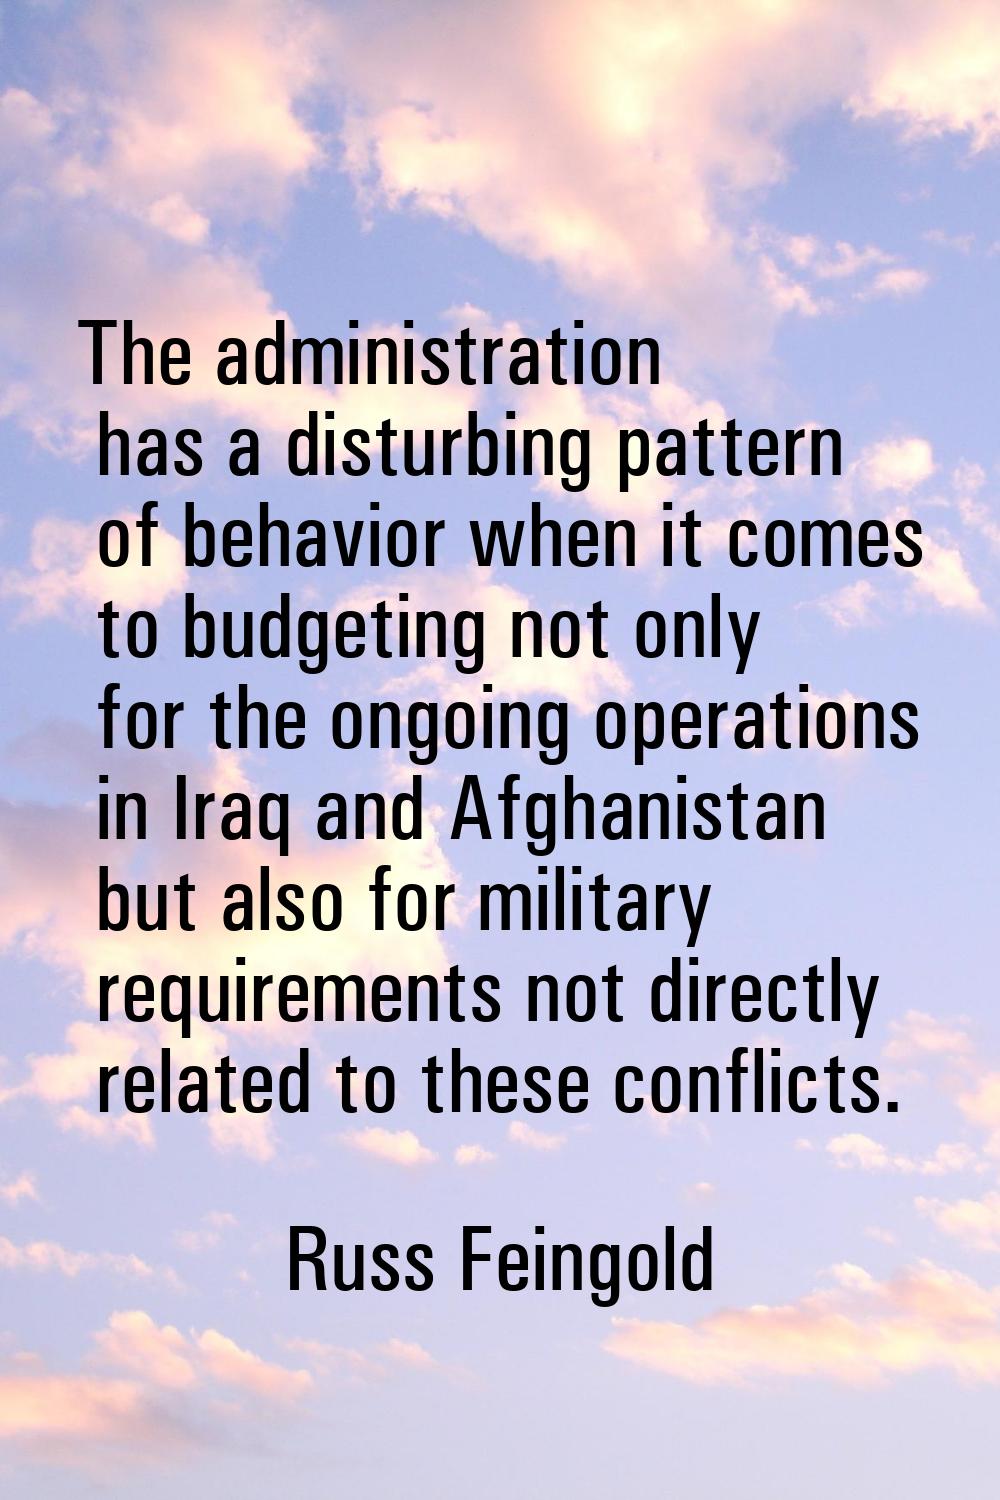 The administration has a disturbing pattern of behavior when it comes to budgeting not only for the